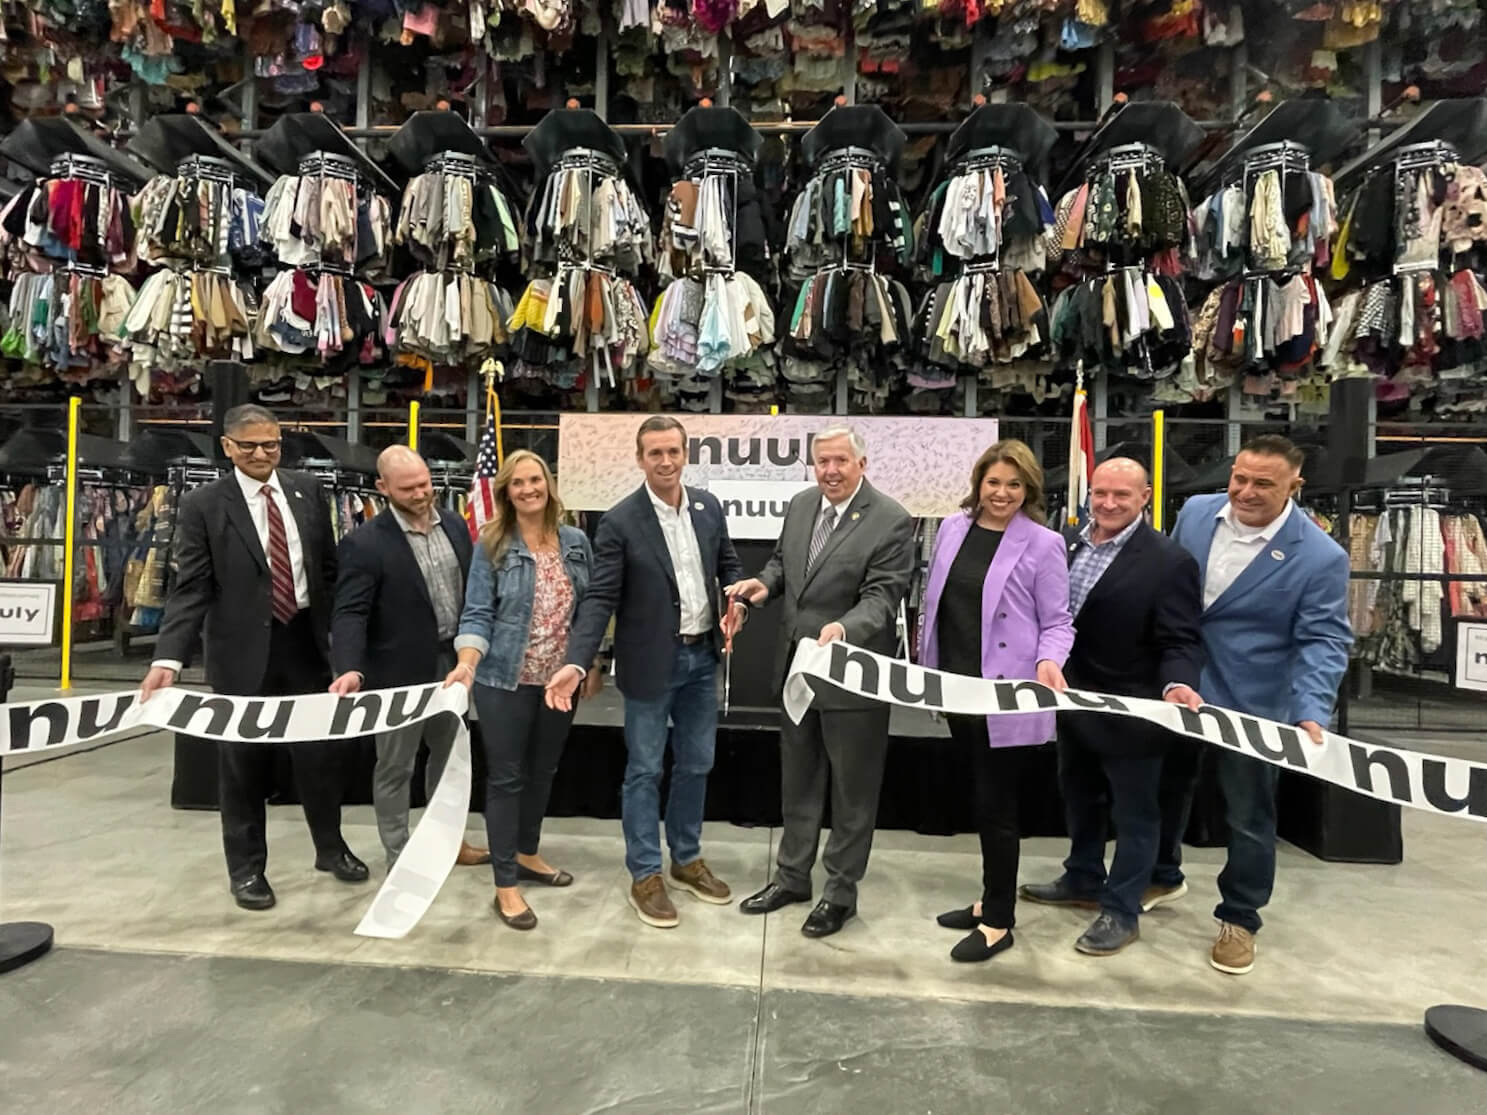 URBN Opens $60 Million Fulfillment Center In Missouri For Rental Brand Nuuly